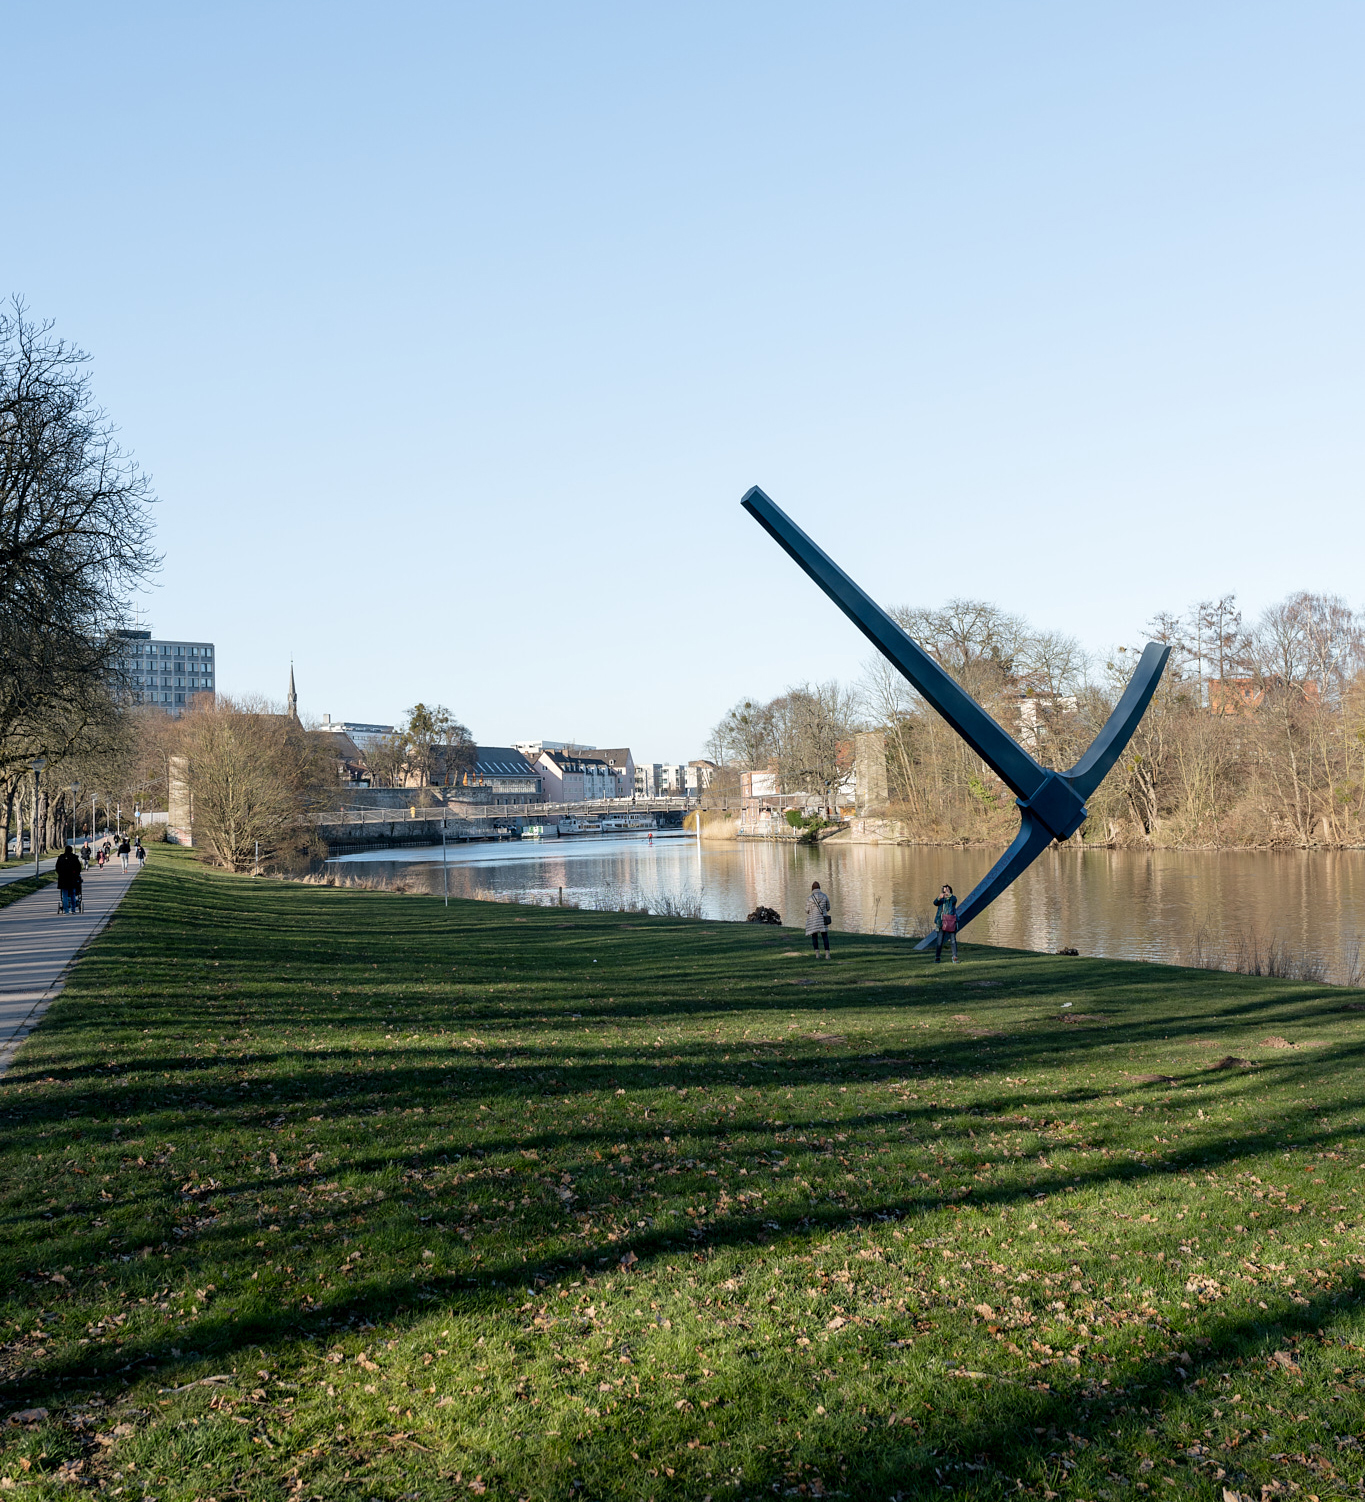 The photo is taken from the bank of the Fulda. It shows green lawn, the blue steel sculpture "Pickaxe" and behind it the Fulda waters, trees, blue sky.